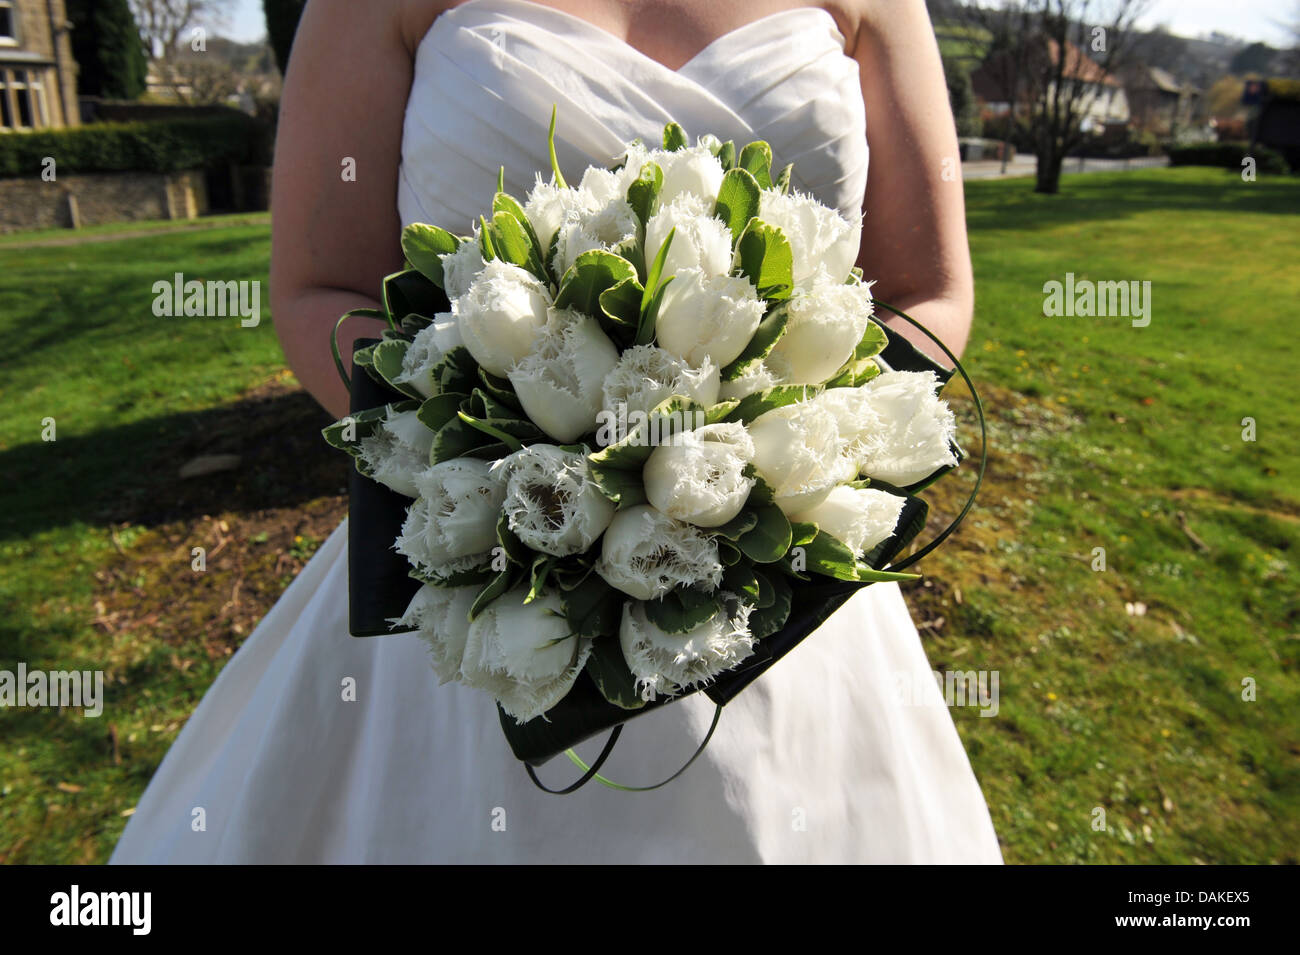 A close up of bride's wedding flower bouquet Stock Photo